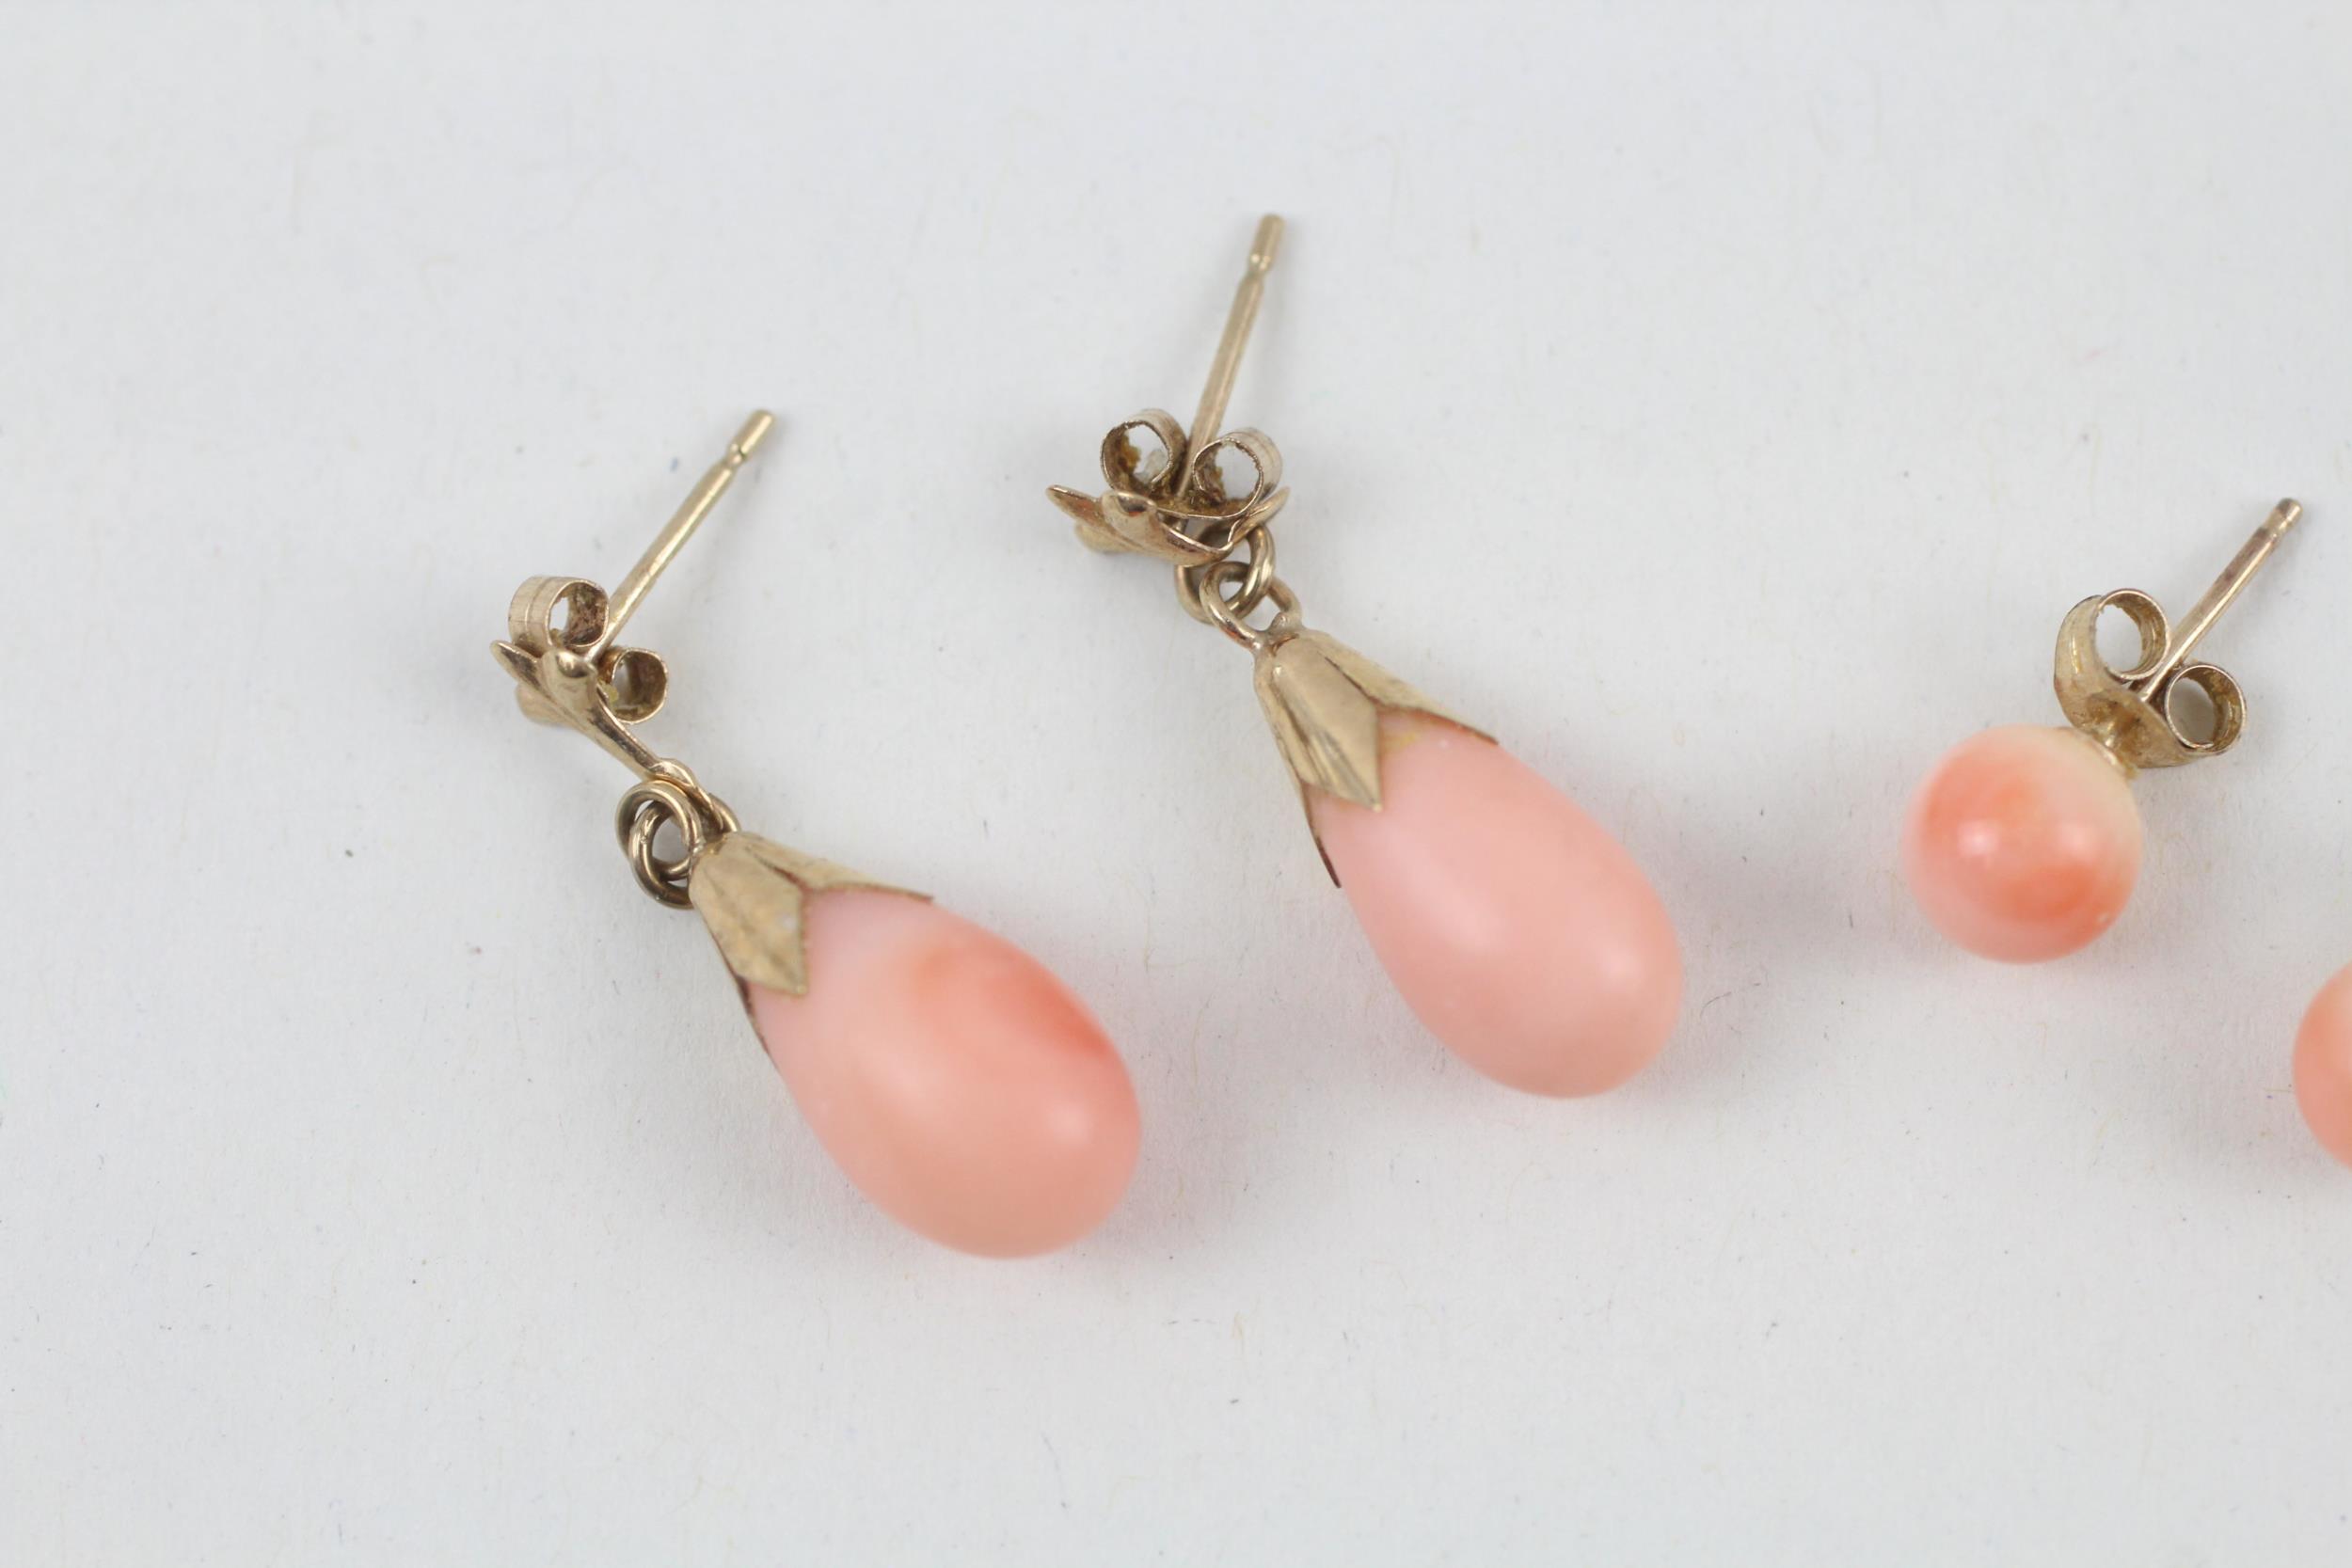 2 x 9ct gold coral set earrings, drops and studs 2.5 g - Image 2 of 5